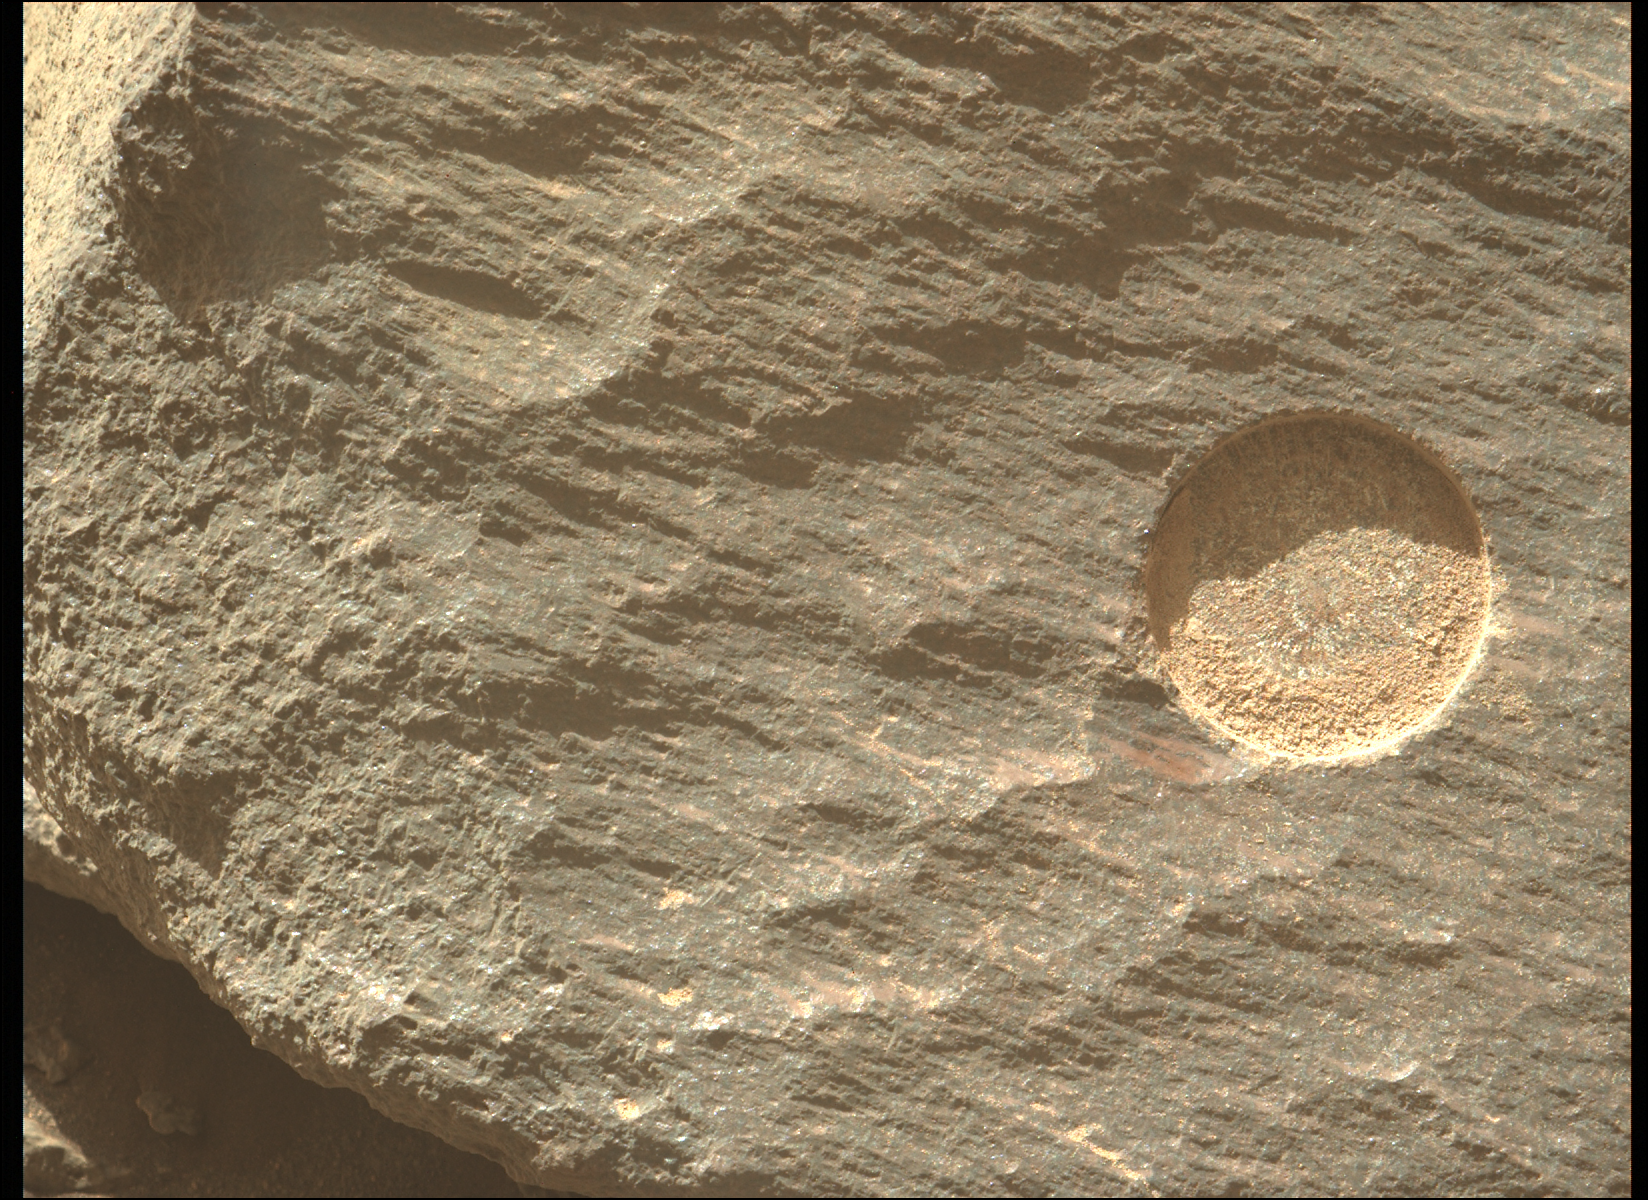 Image taken was taken by the Mars Perseverance rover displaying the abrasion patch prior to collecting the rock sample 9 at Atsá (aka "Atsah").